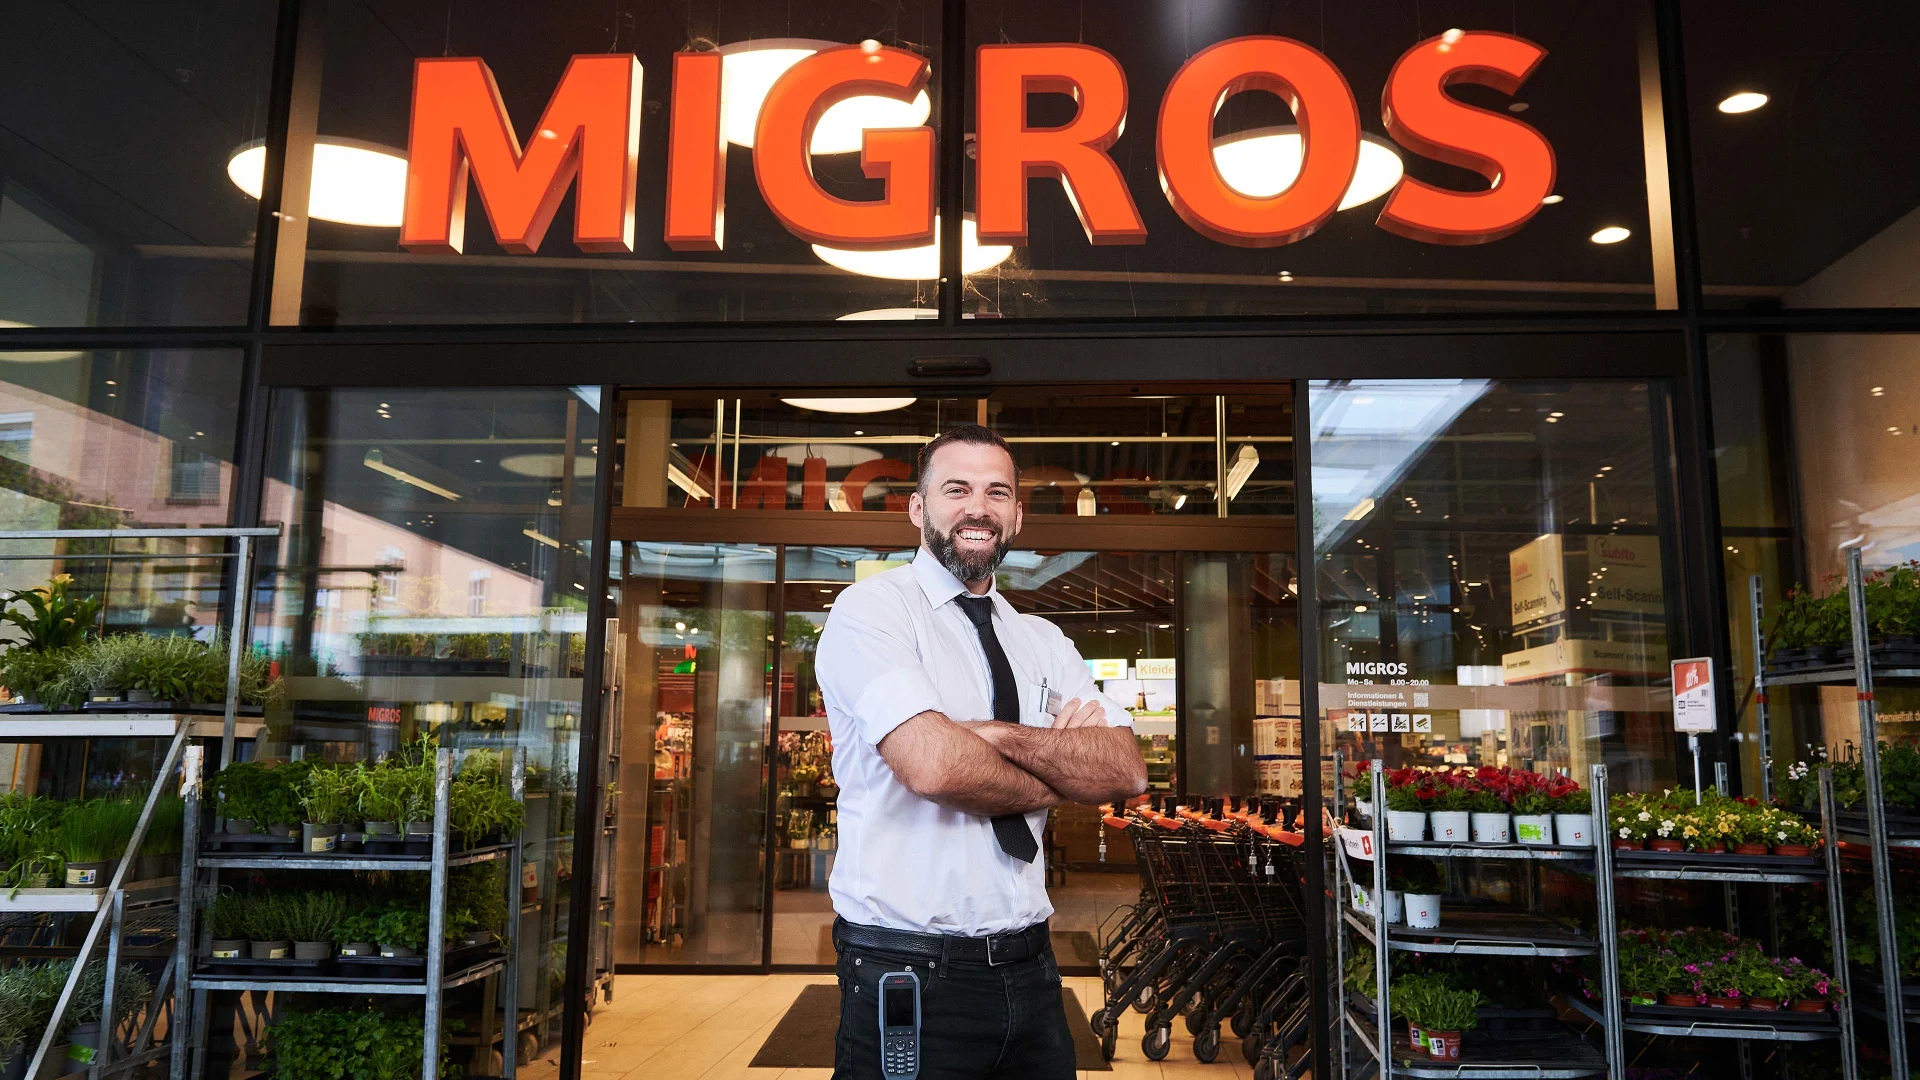 Yves Brunner in front of ‘his’ Migros store in Affoltern am Albis